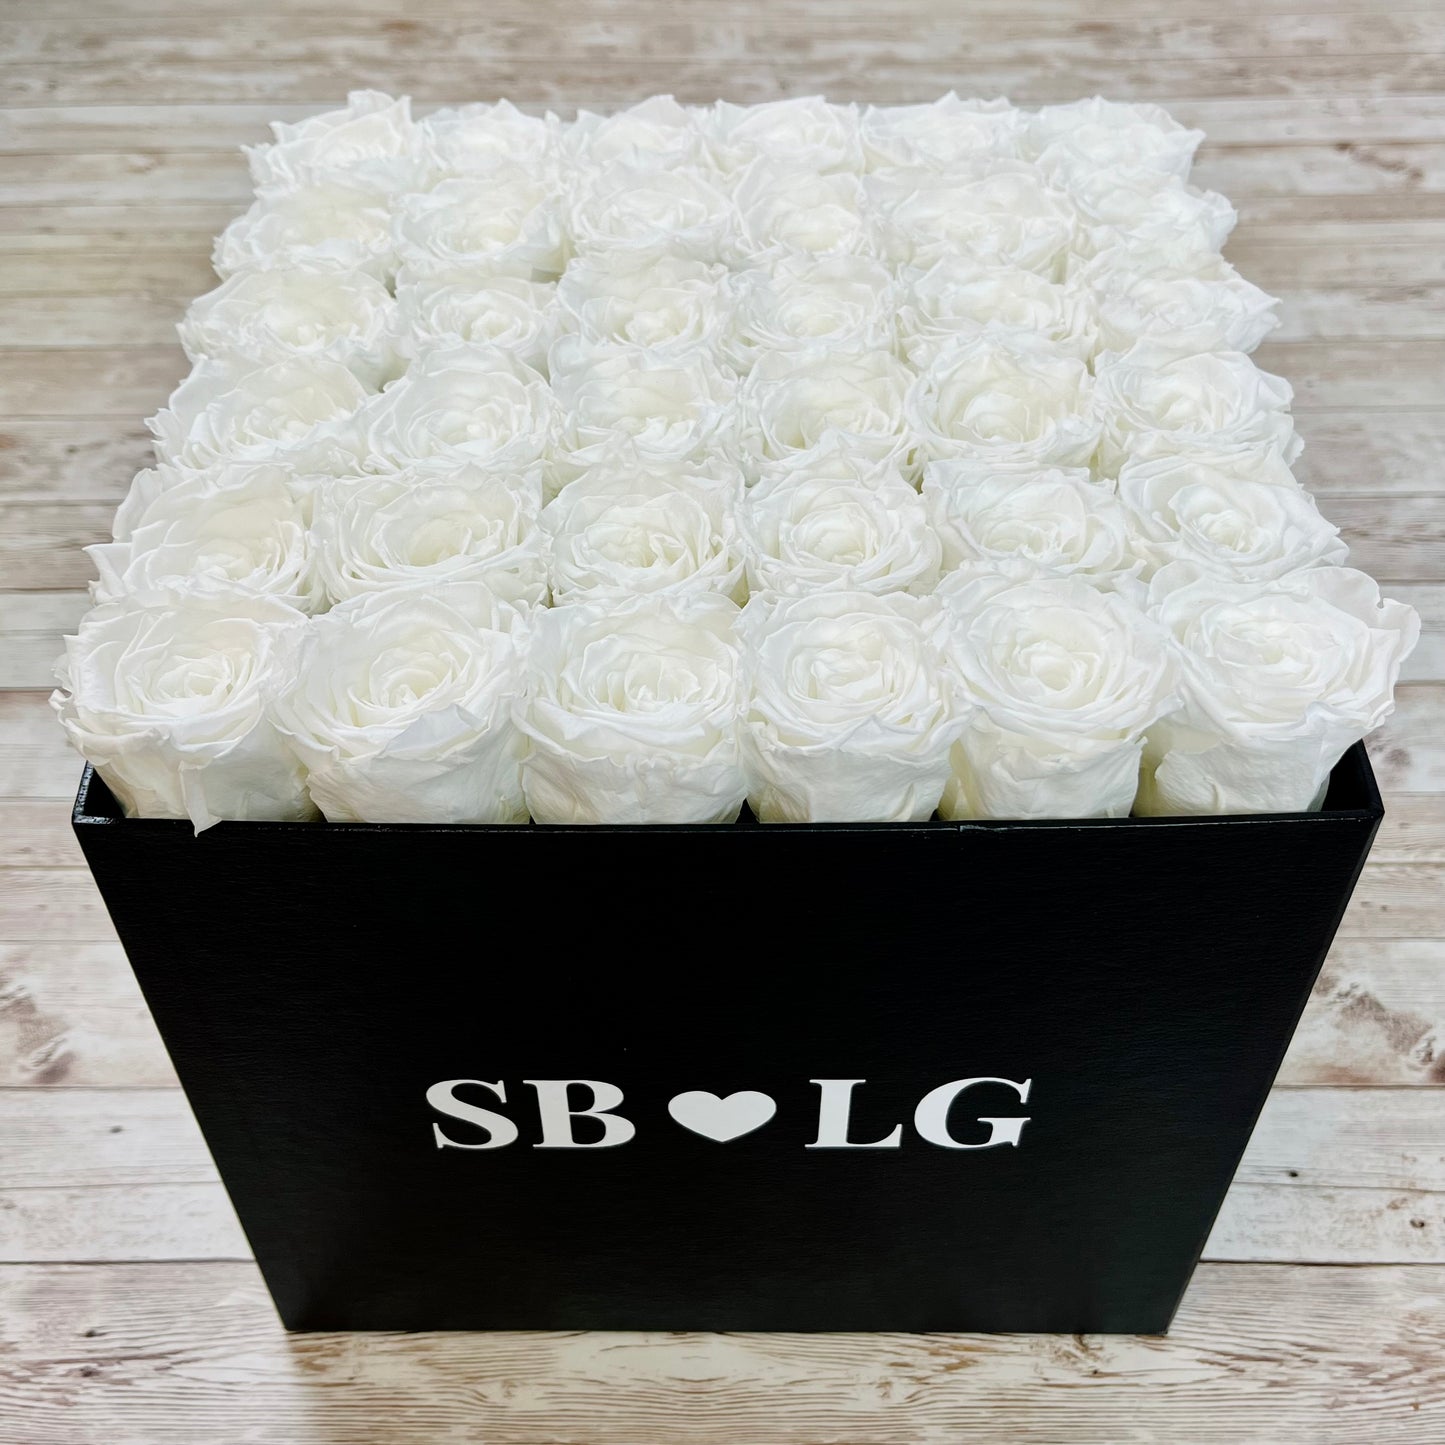 Black Square Bloom Box - Infinity Roses - White One Year Roses - Box of Roses - Rose Colours divider-Angelic White